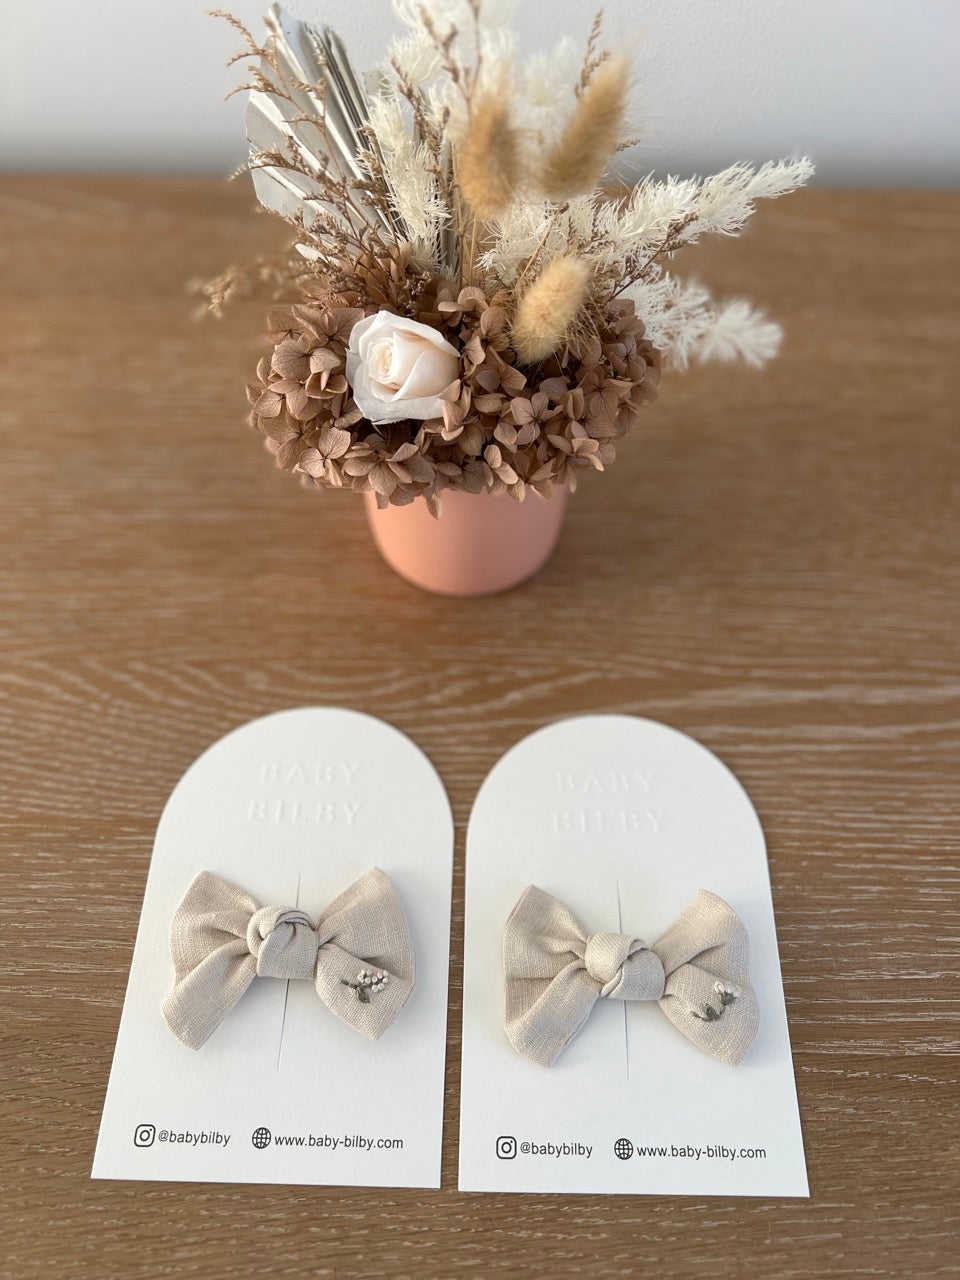 Petite Embroidered Bow - Natural